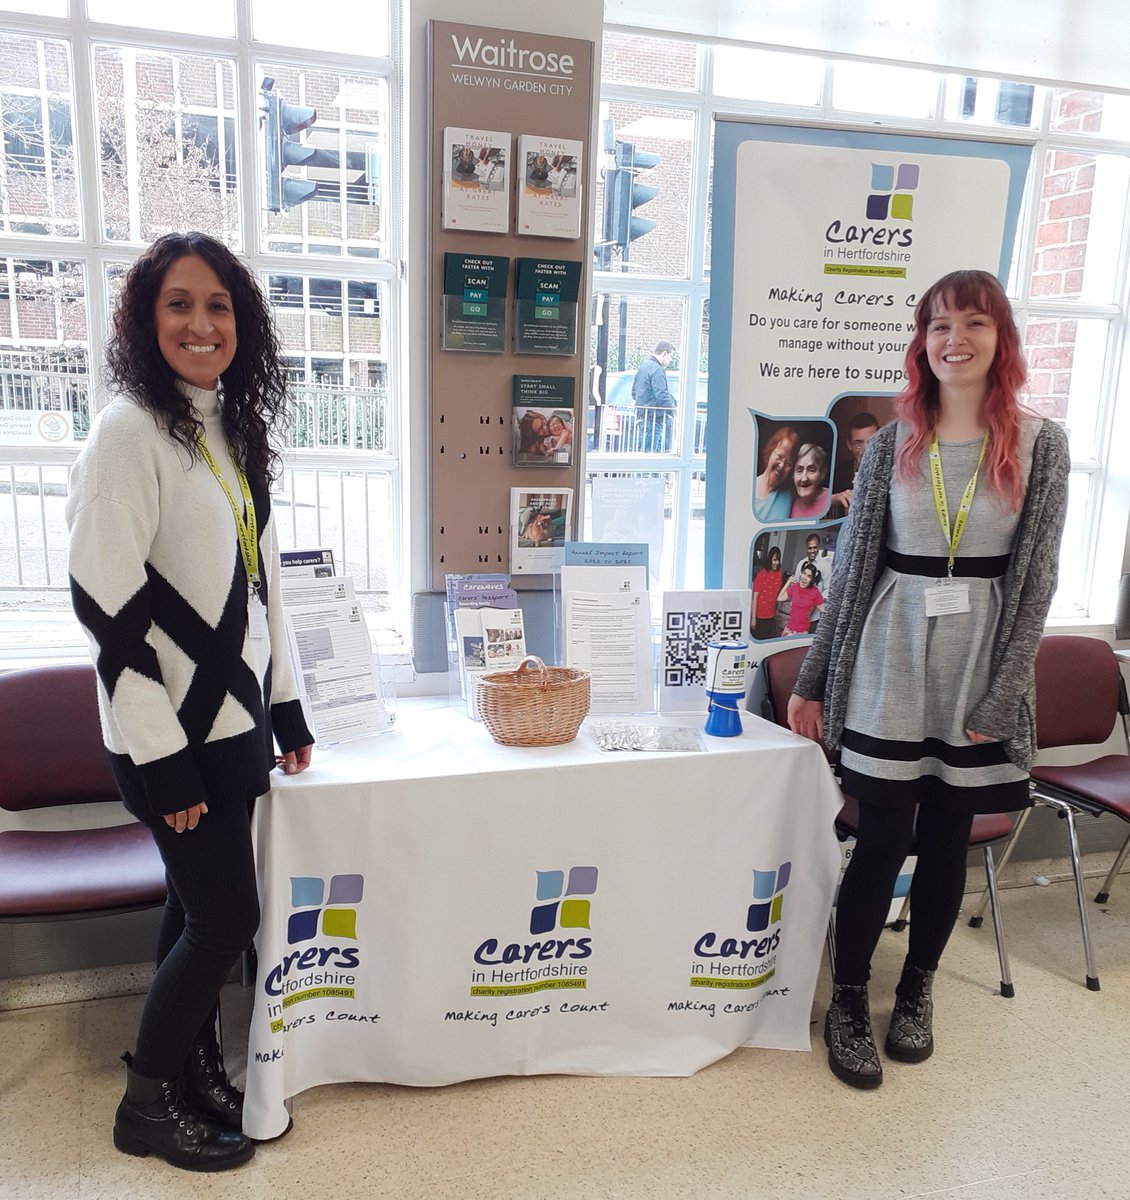 A huge thank you to Waitrose in Welwyn Garden City for having us in store last Friday and all the lovely customers who came over for a chat and to support us. If you are interested in volunteering for us at events you can learn more at carersinherts.org.uk/volunteeror call 01992 58 69 69